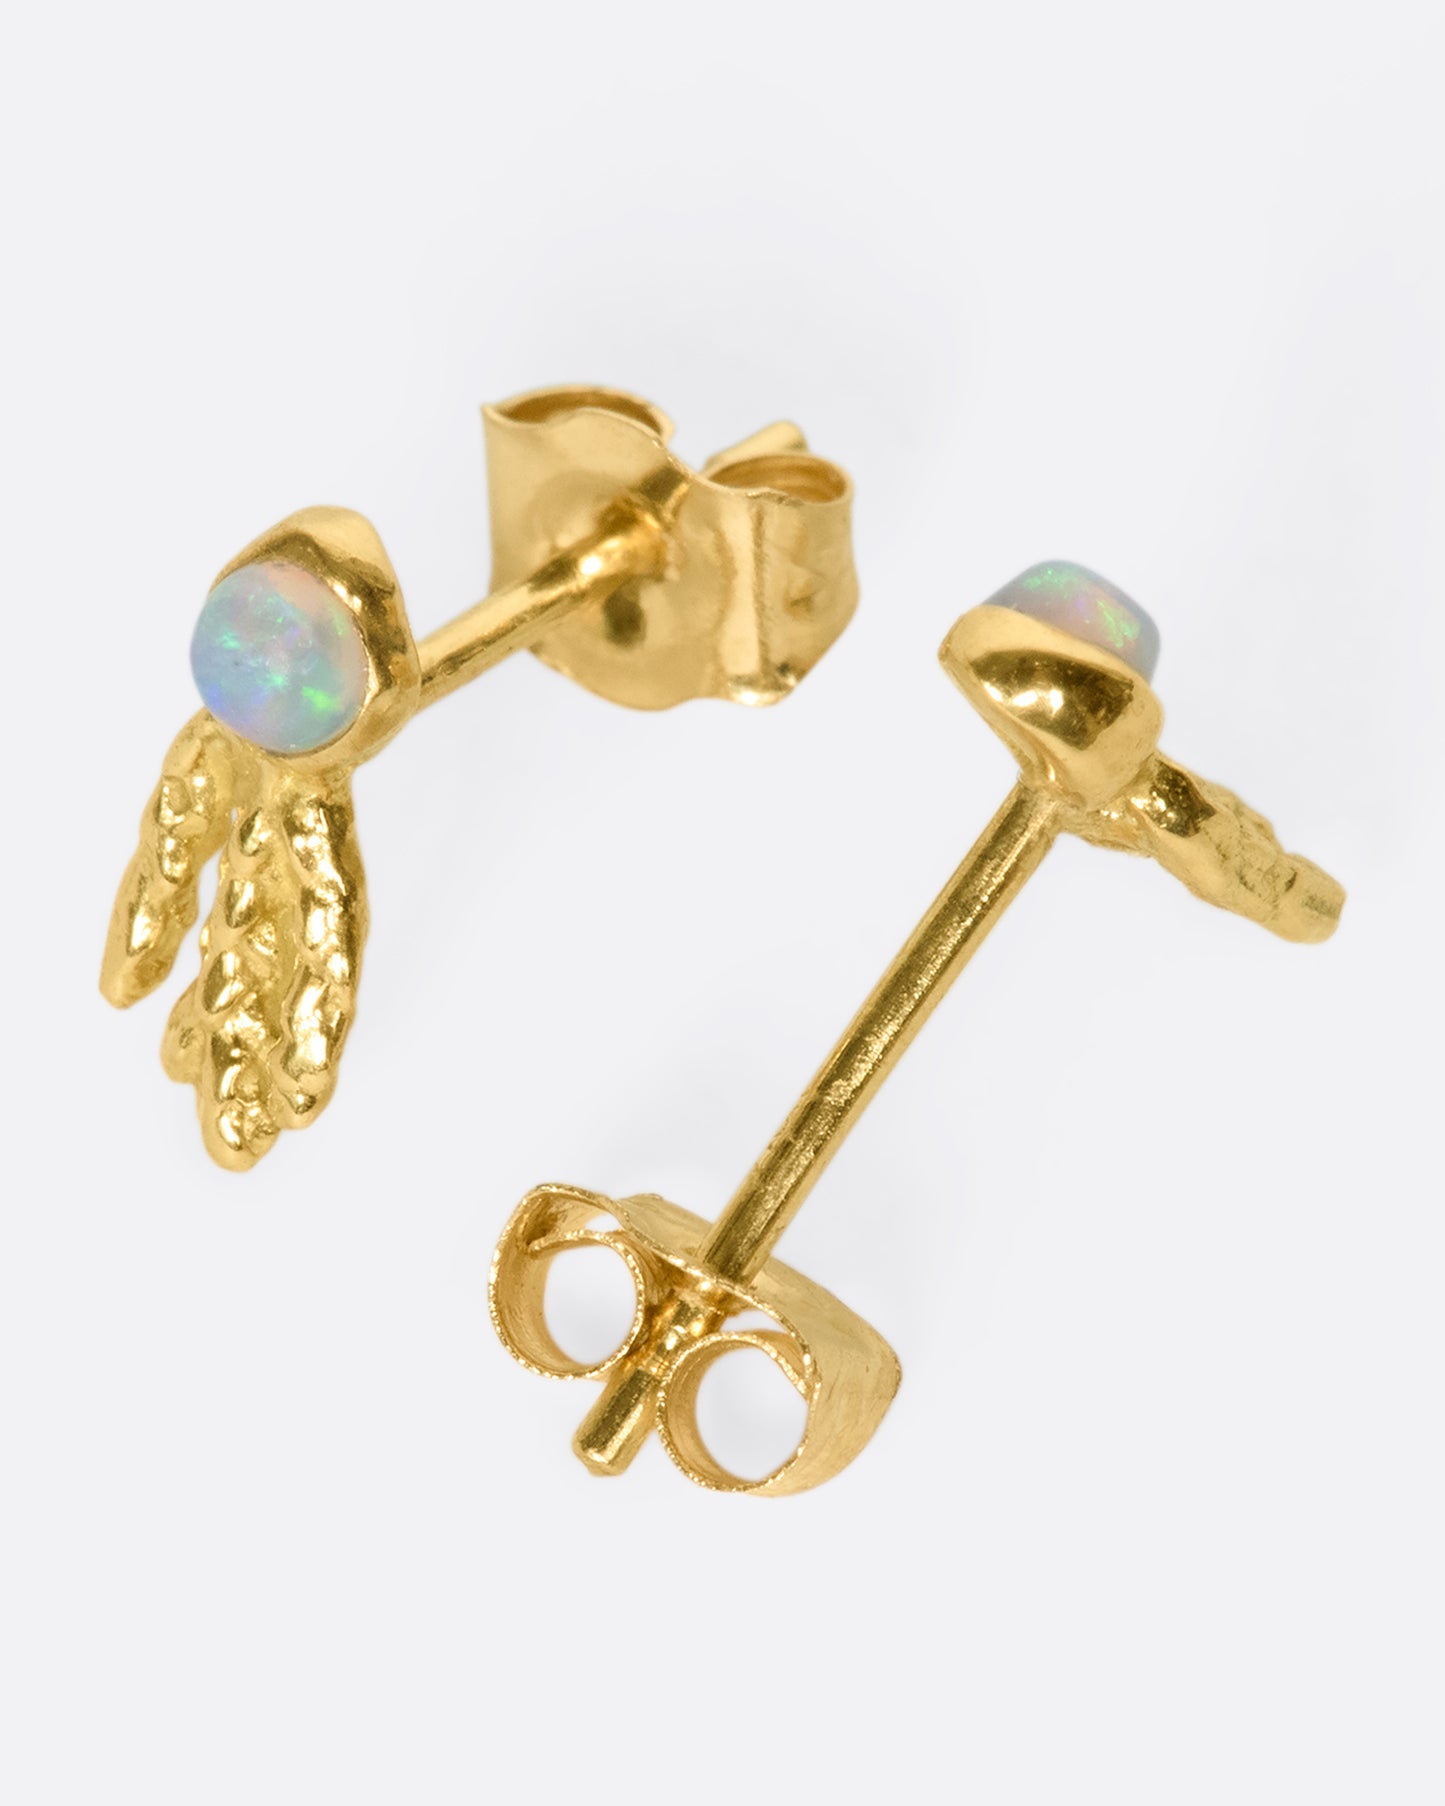 18k gold and opal small drop earrings that look like a glowing sea creatures swimming across your ear